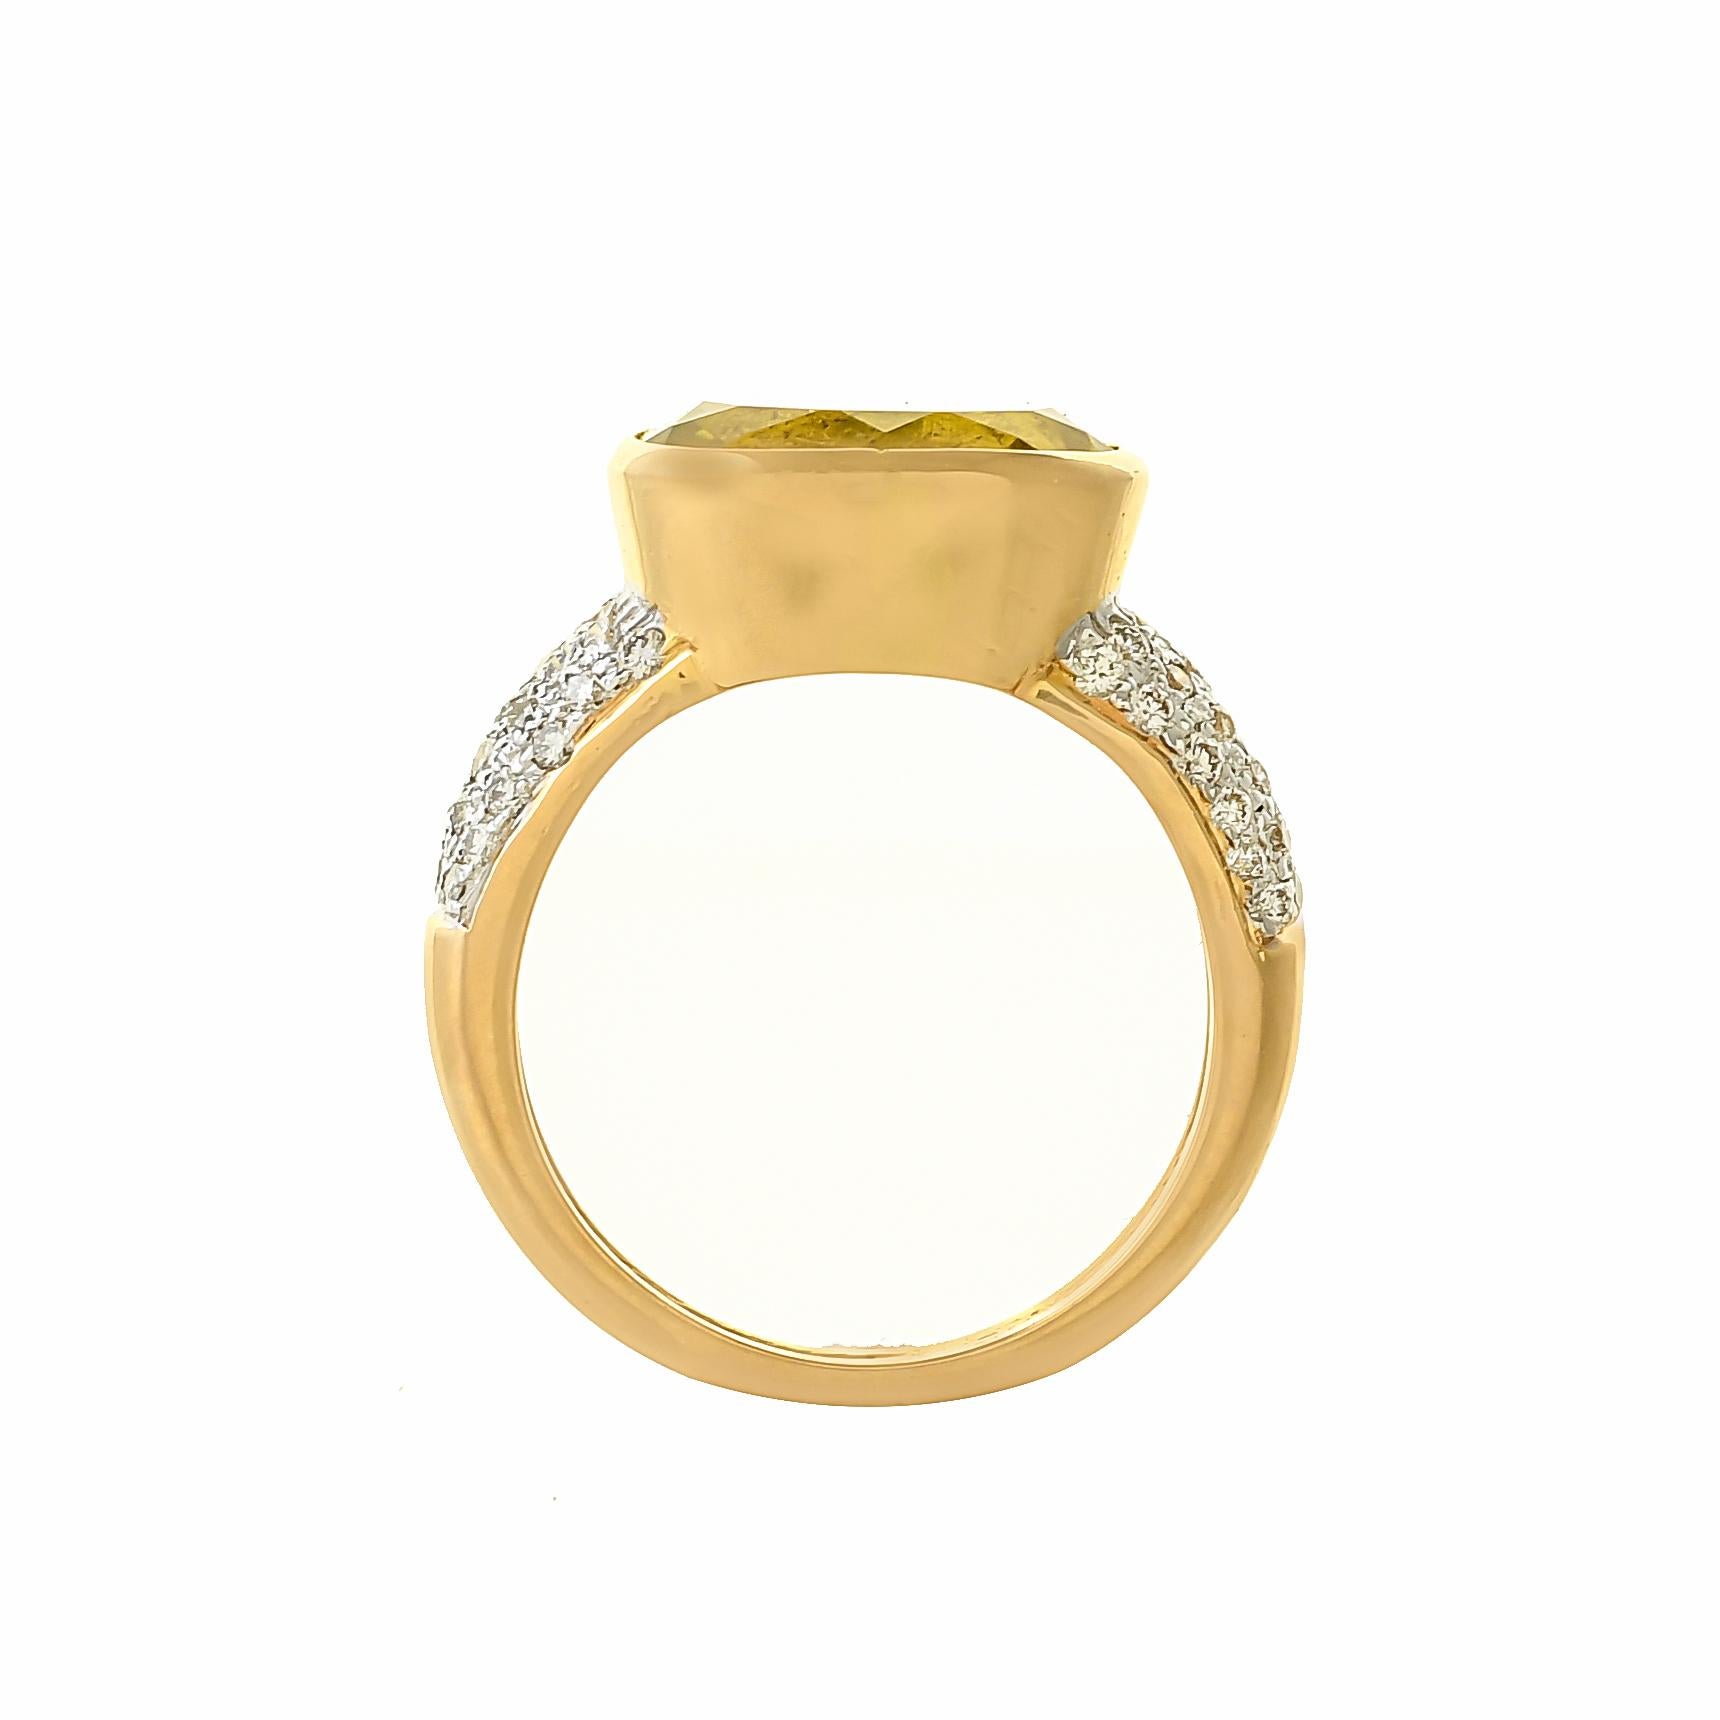 Design to encourage focus and clarity of thoughts, this beautiful ring features oval-shaped lemon quartz weighing approximately 4.65 carats, inserted within a yellow gold bezel on a tapering band of 18 karats yellow gold pave set with round diamonds